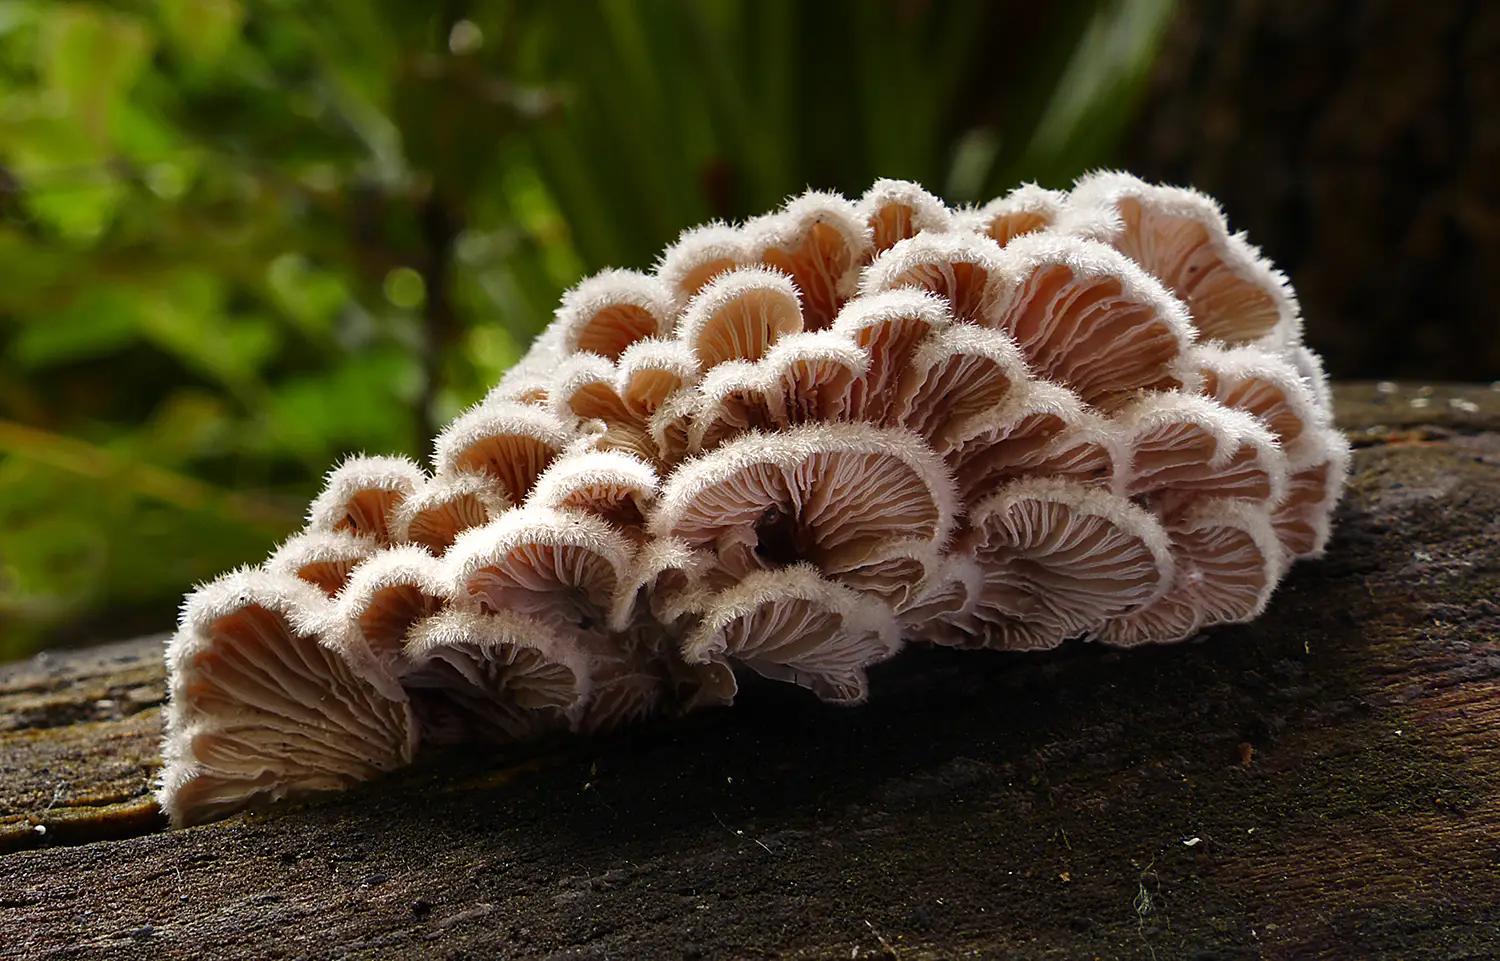 A cluster of delicate, fringed mushrooms sprouts from a decaying log. The fungi’s intricate gills are highlighted by a soft white fuzz.